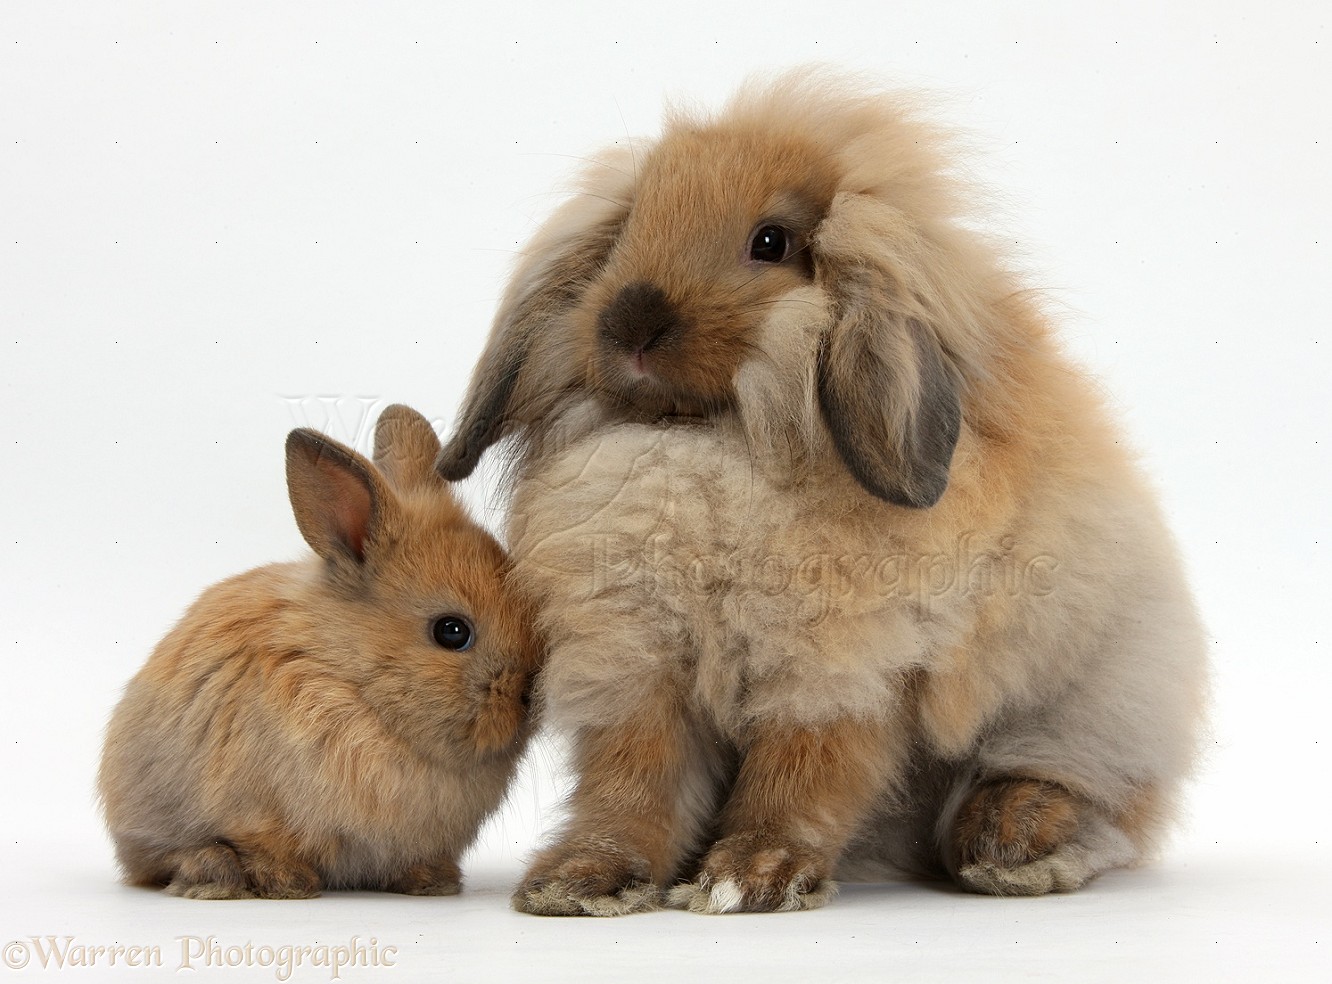 Fluffy Lionhead X Lop Rabbit And Cute Baby Bunny Photo Wp38499